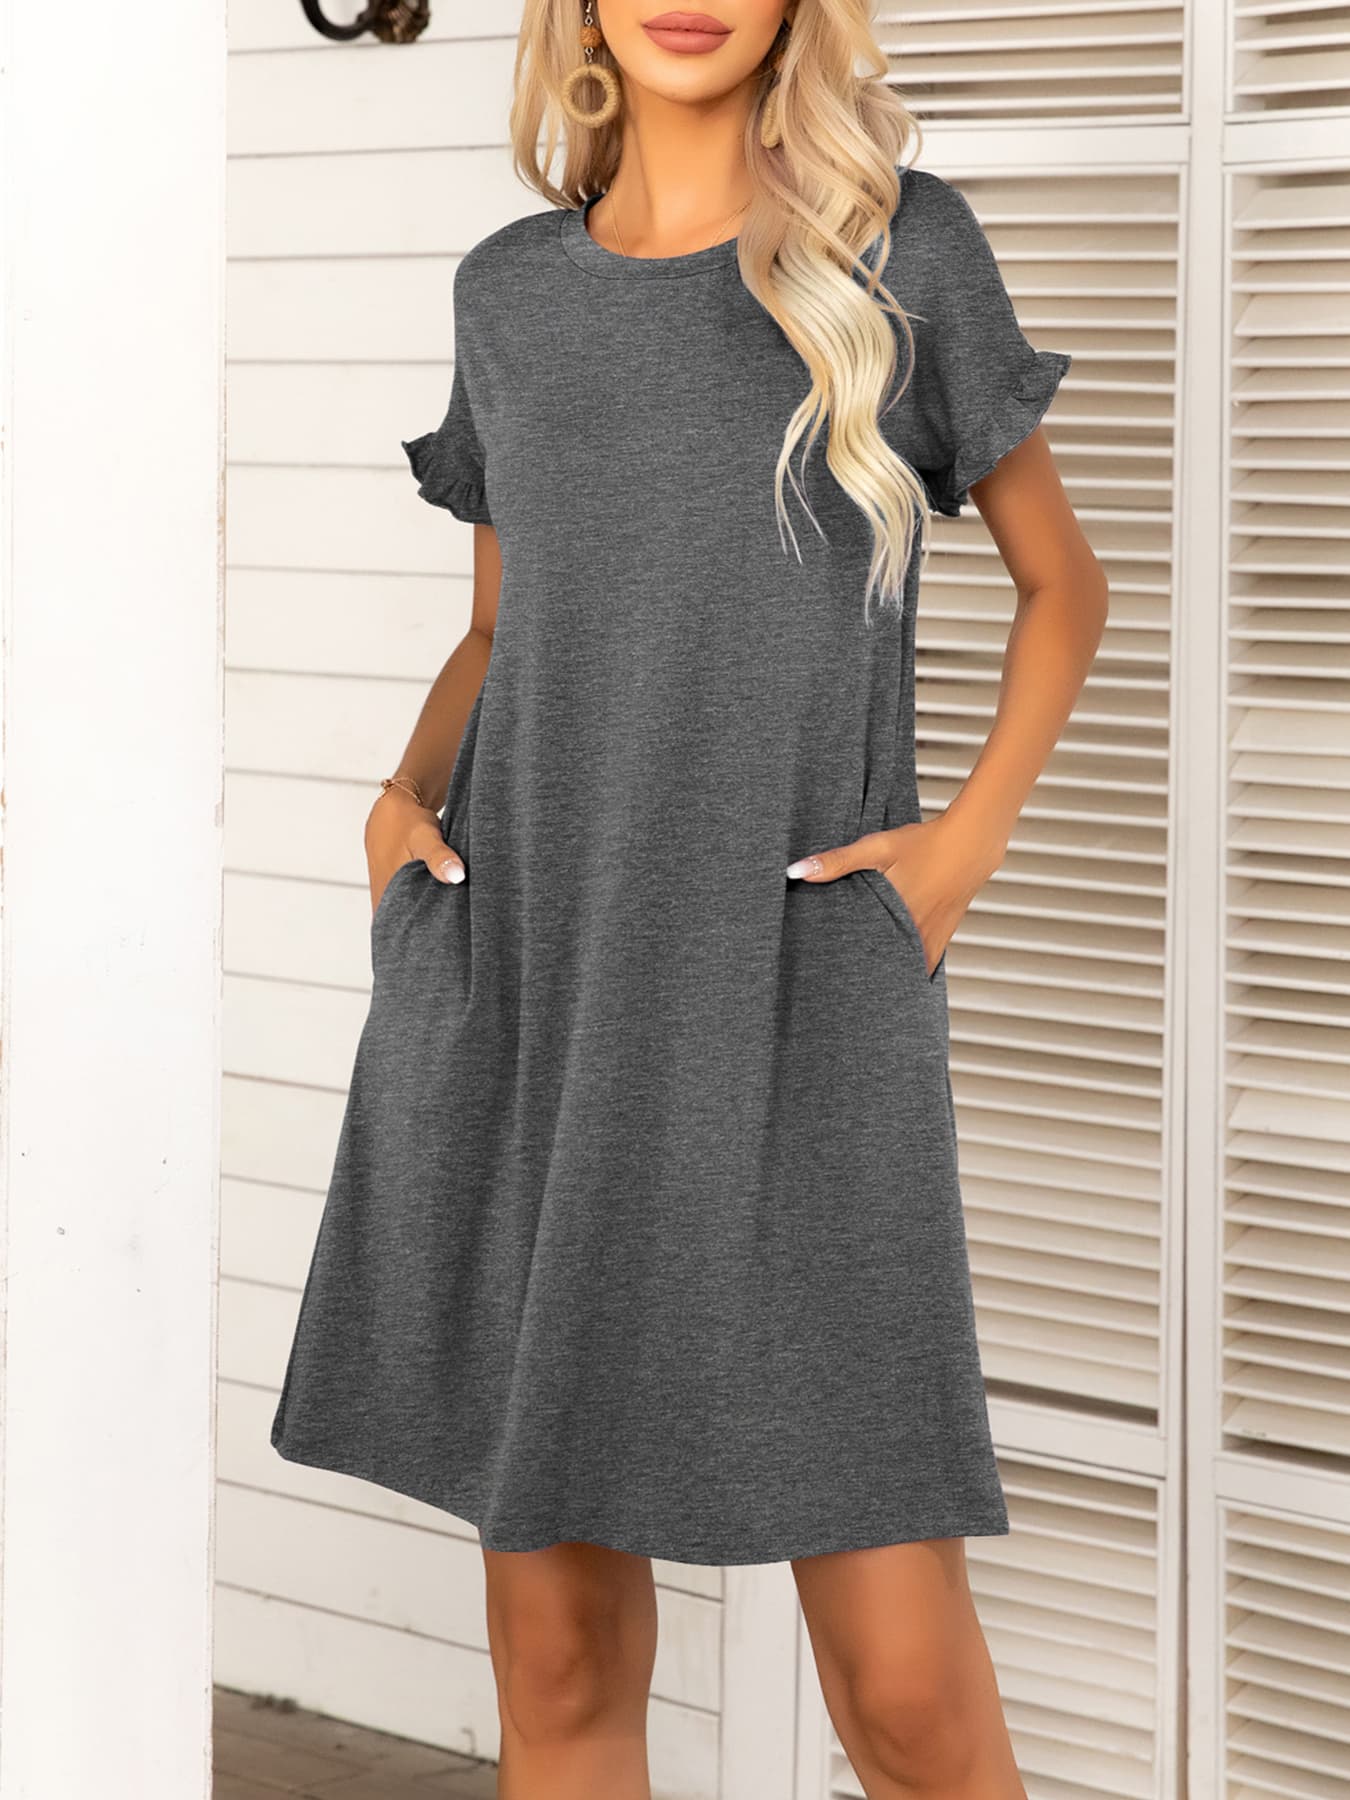 Round Neck Flounce Sleeve Dress with Pockets - FunkyPeacockStore (Store description)